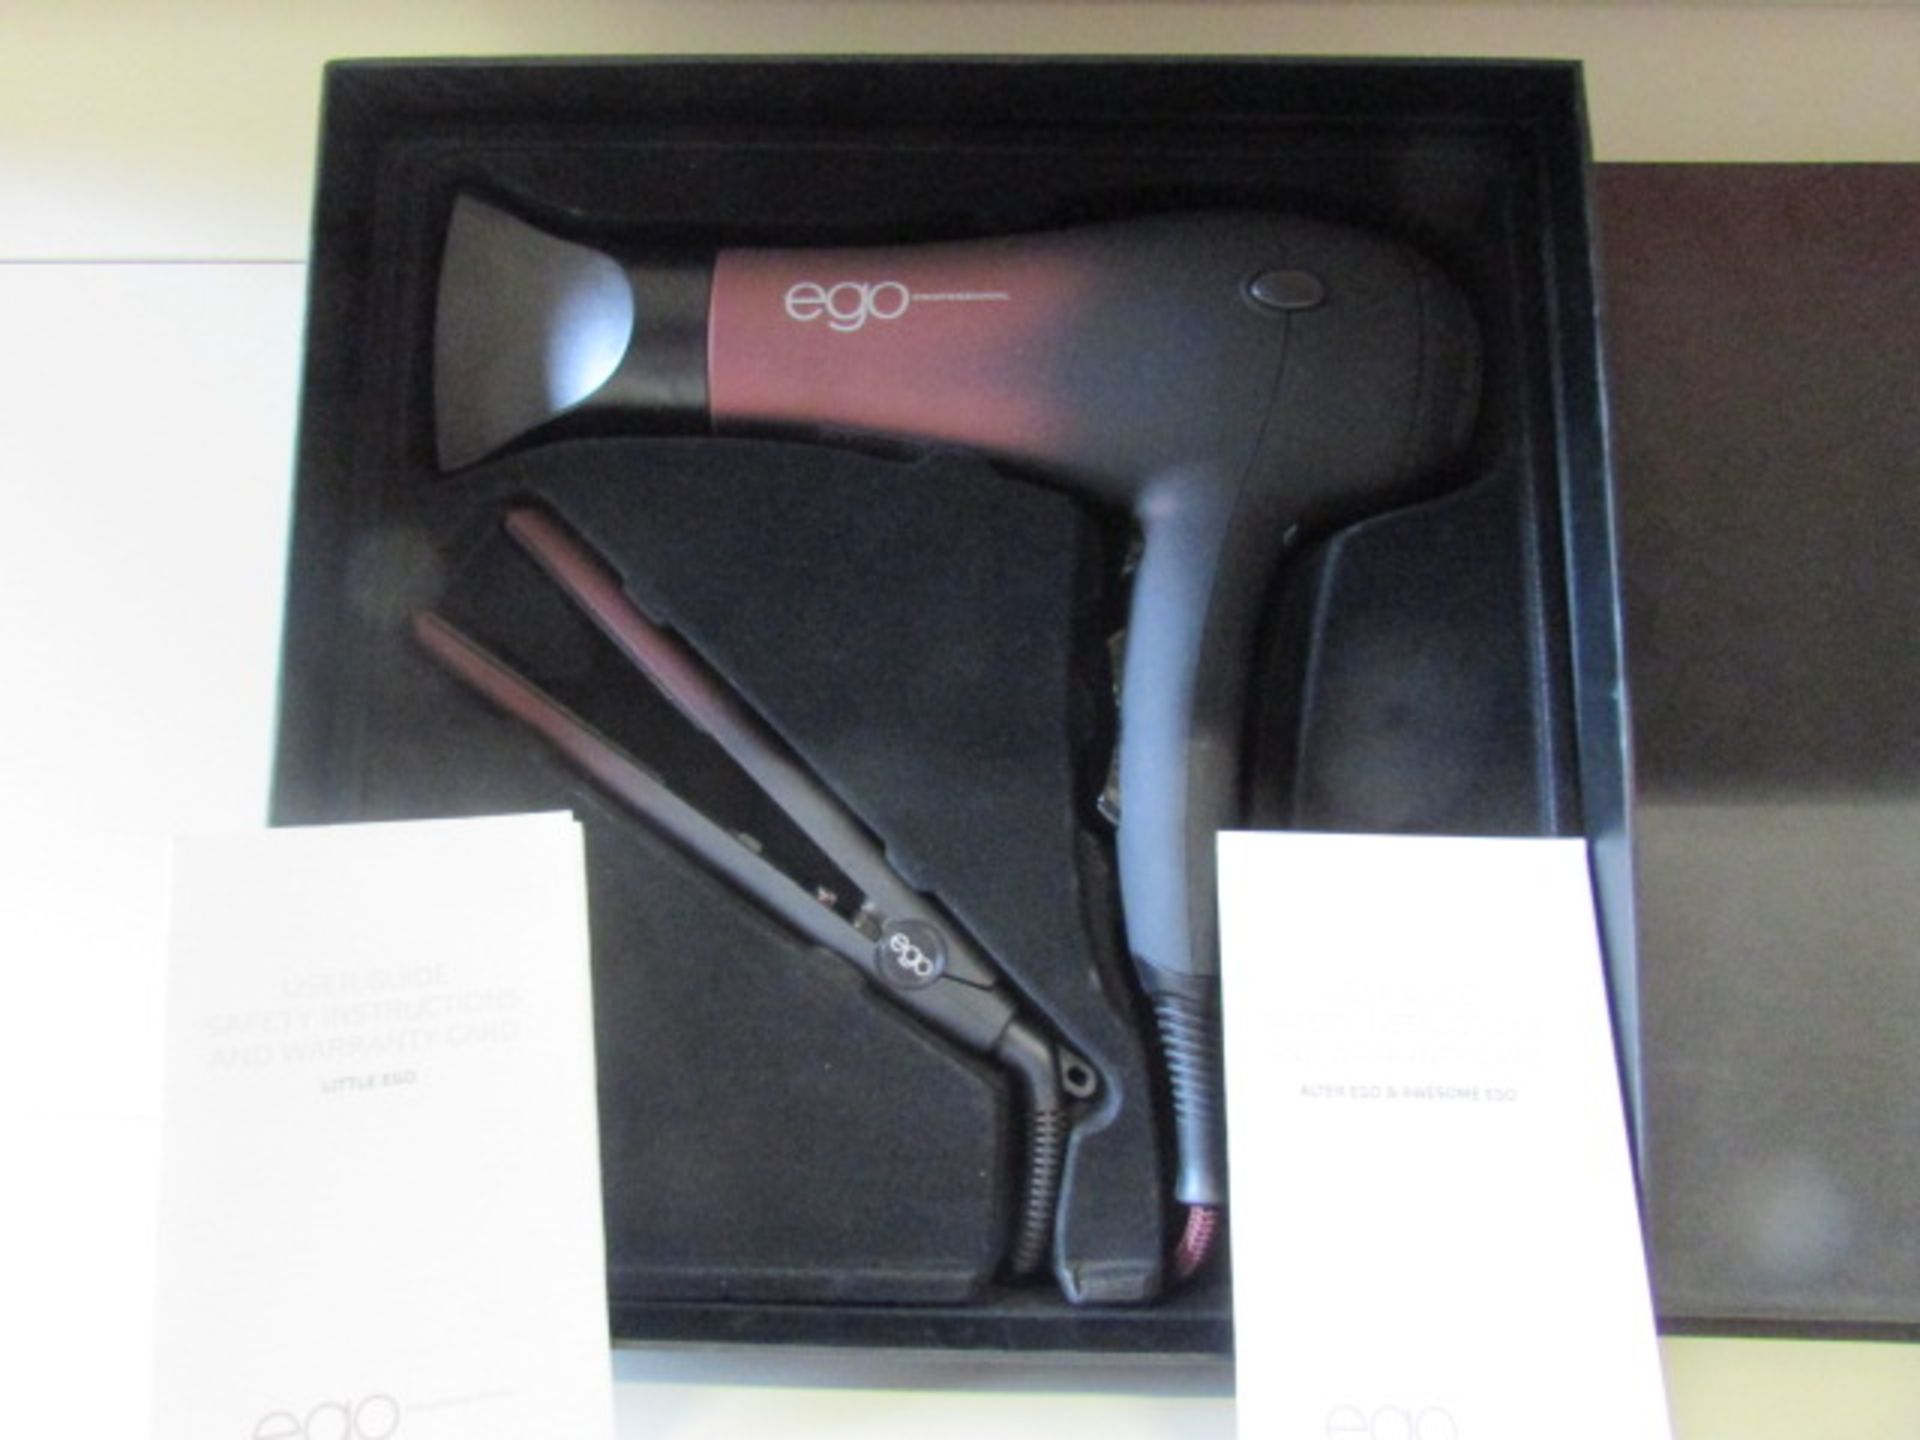 1 x Ego Professional Full On And Fabulous Ego Set (Alter Ego Hairdryer And Little Iron) [Grade A]